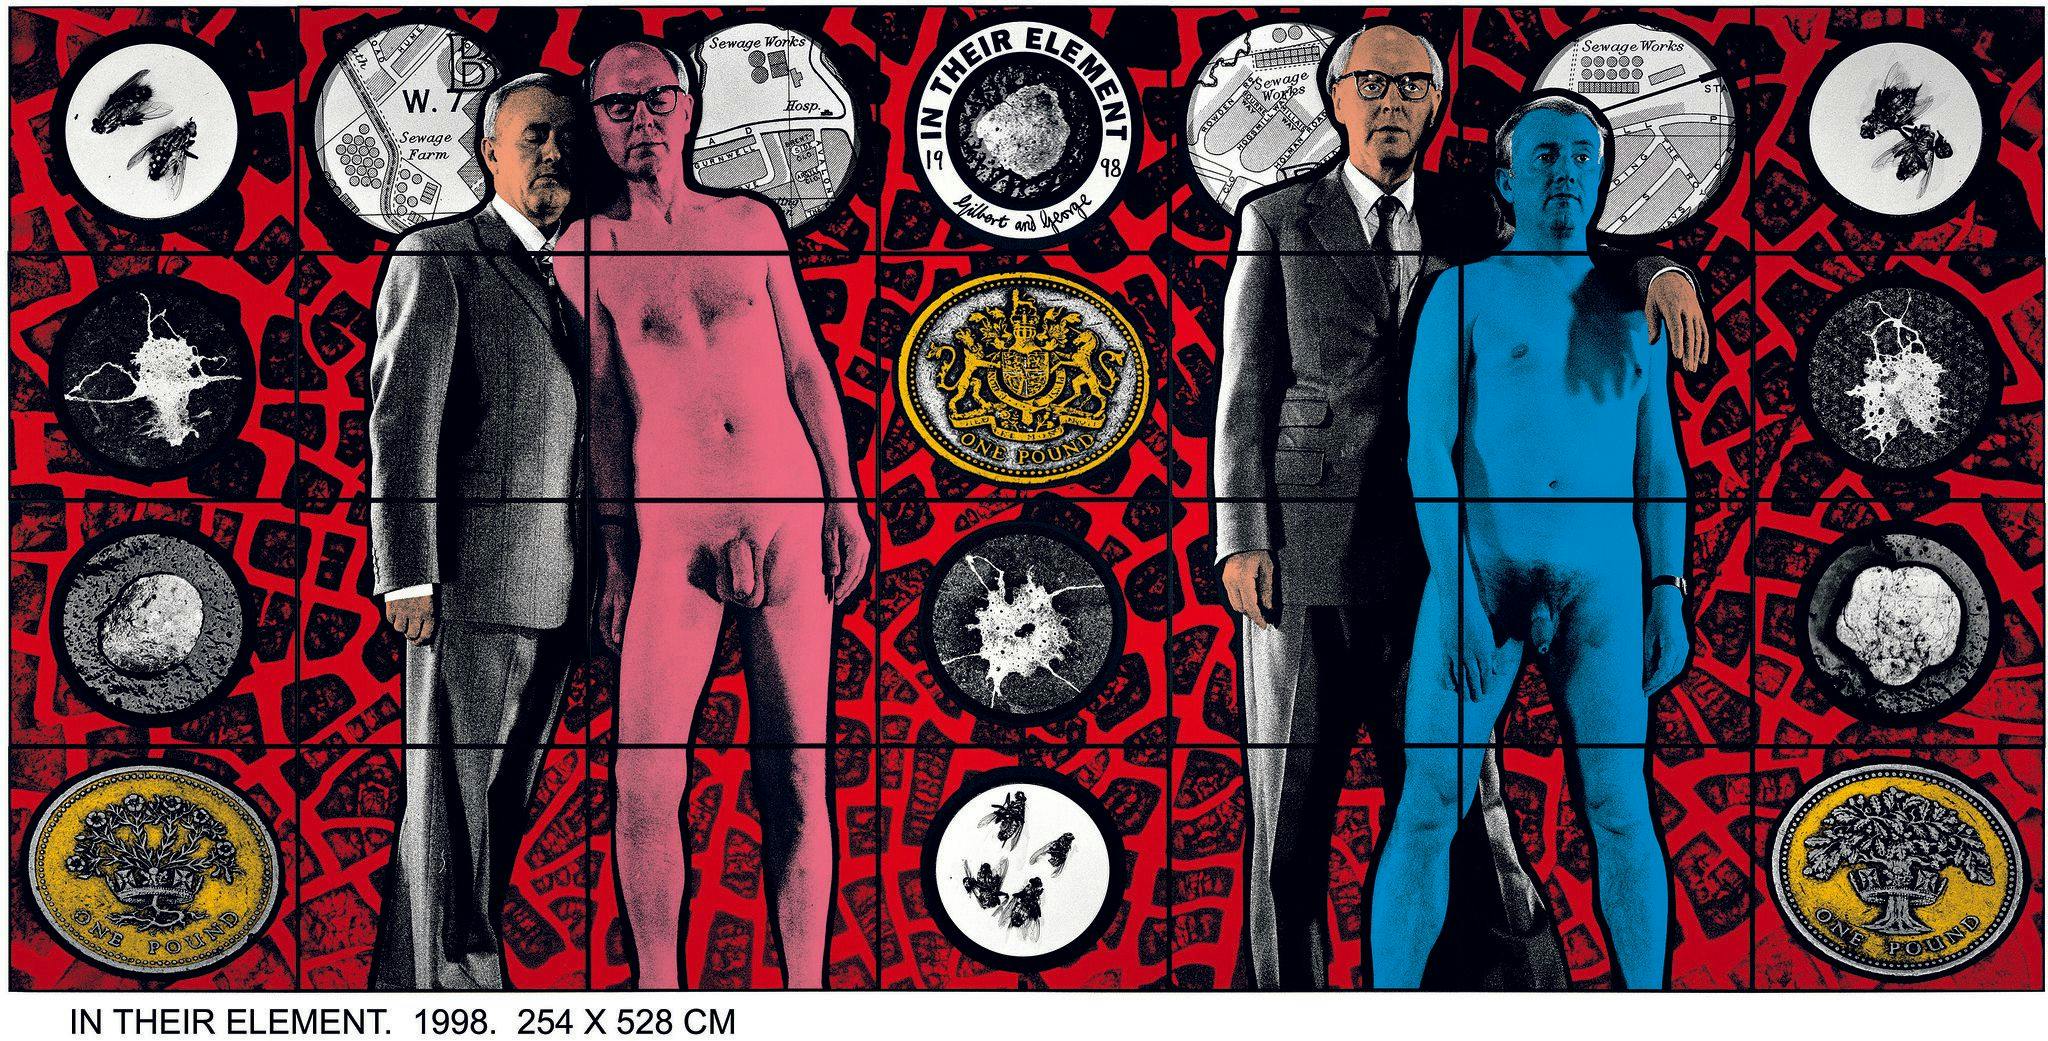 An image of a suited Gilbert & George with their arm around a naked version of the other on a red and black background with emblems.